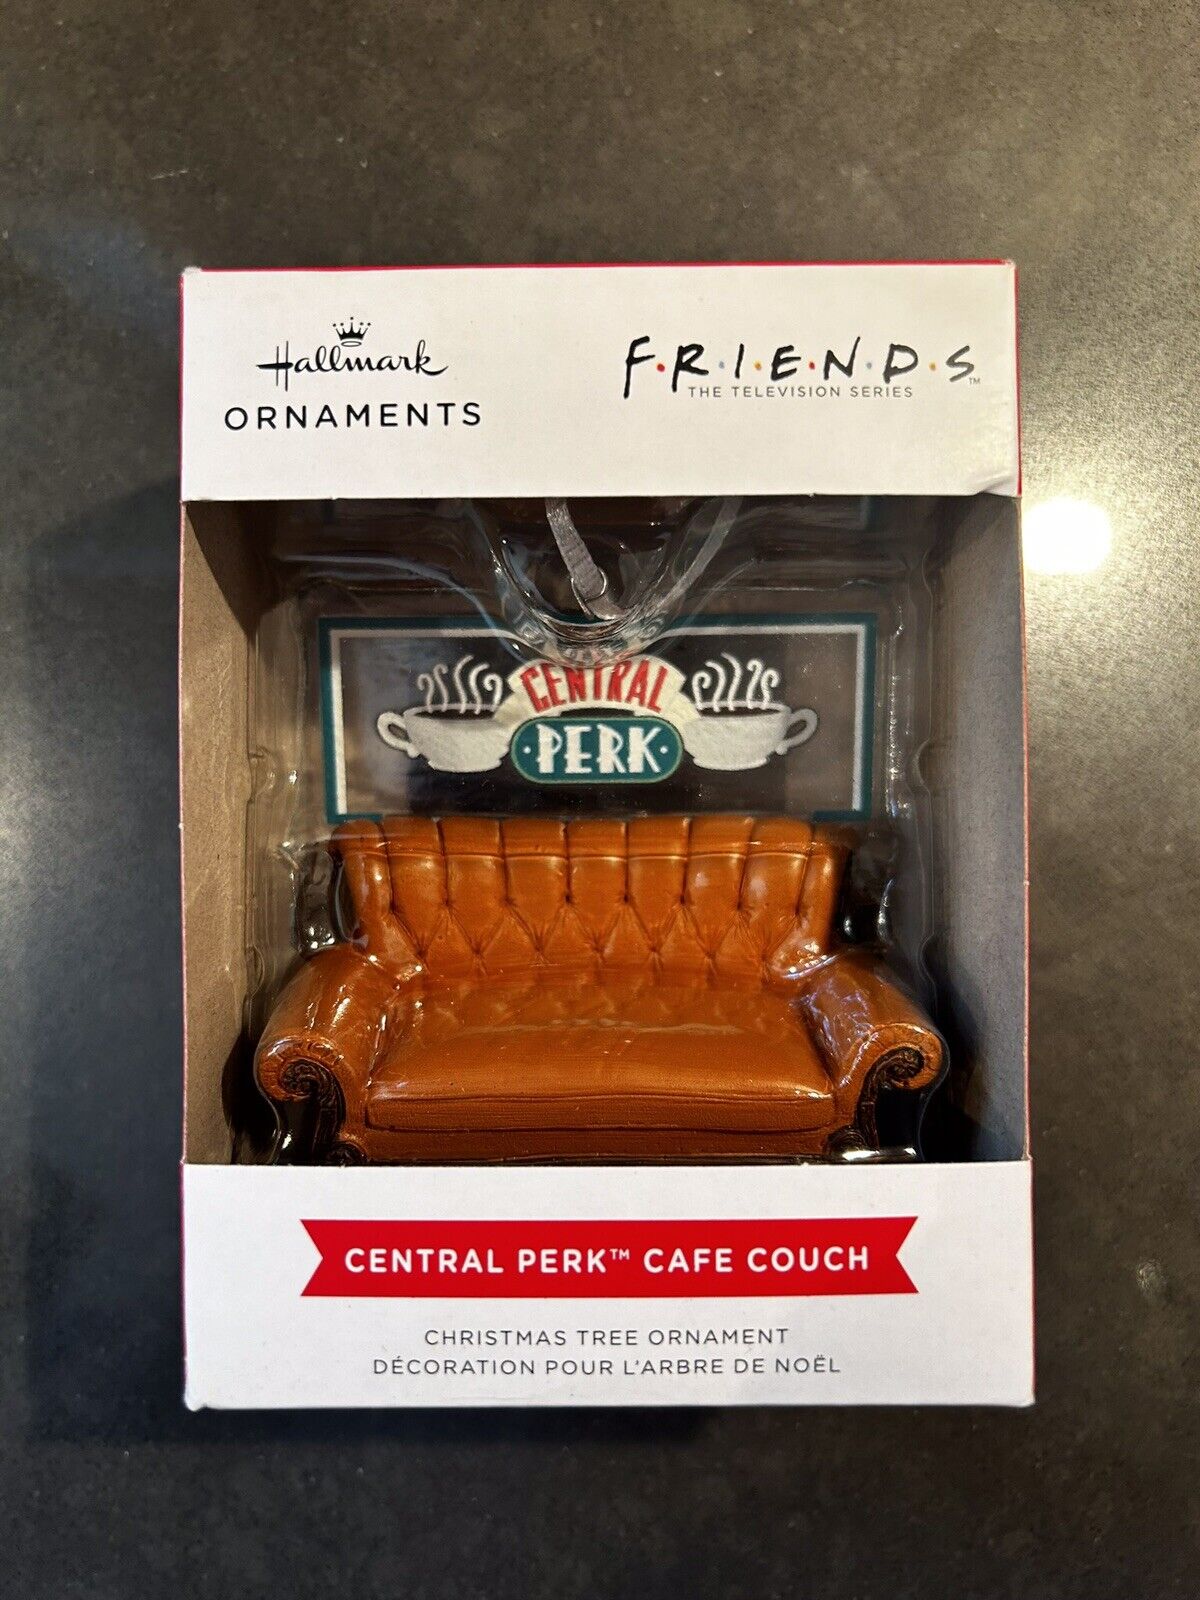 NEW 2021 Hallmark Friends TV Show Central Perk Cafe Couch Tree Ornament  